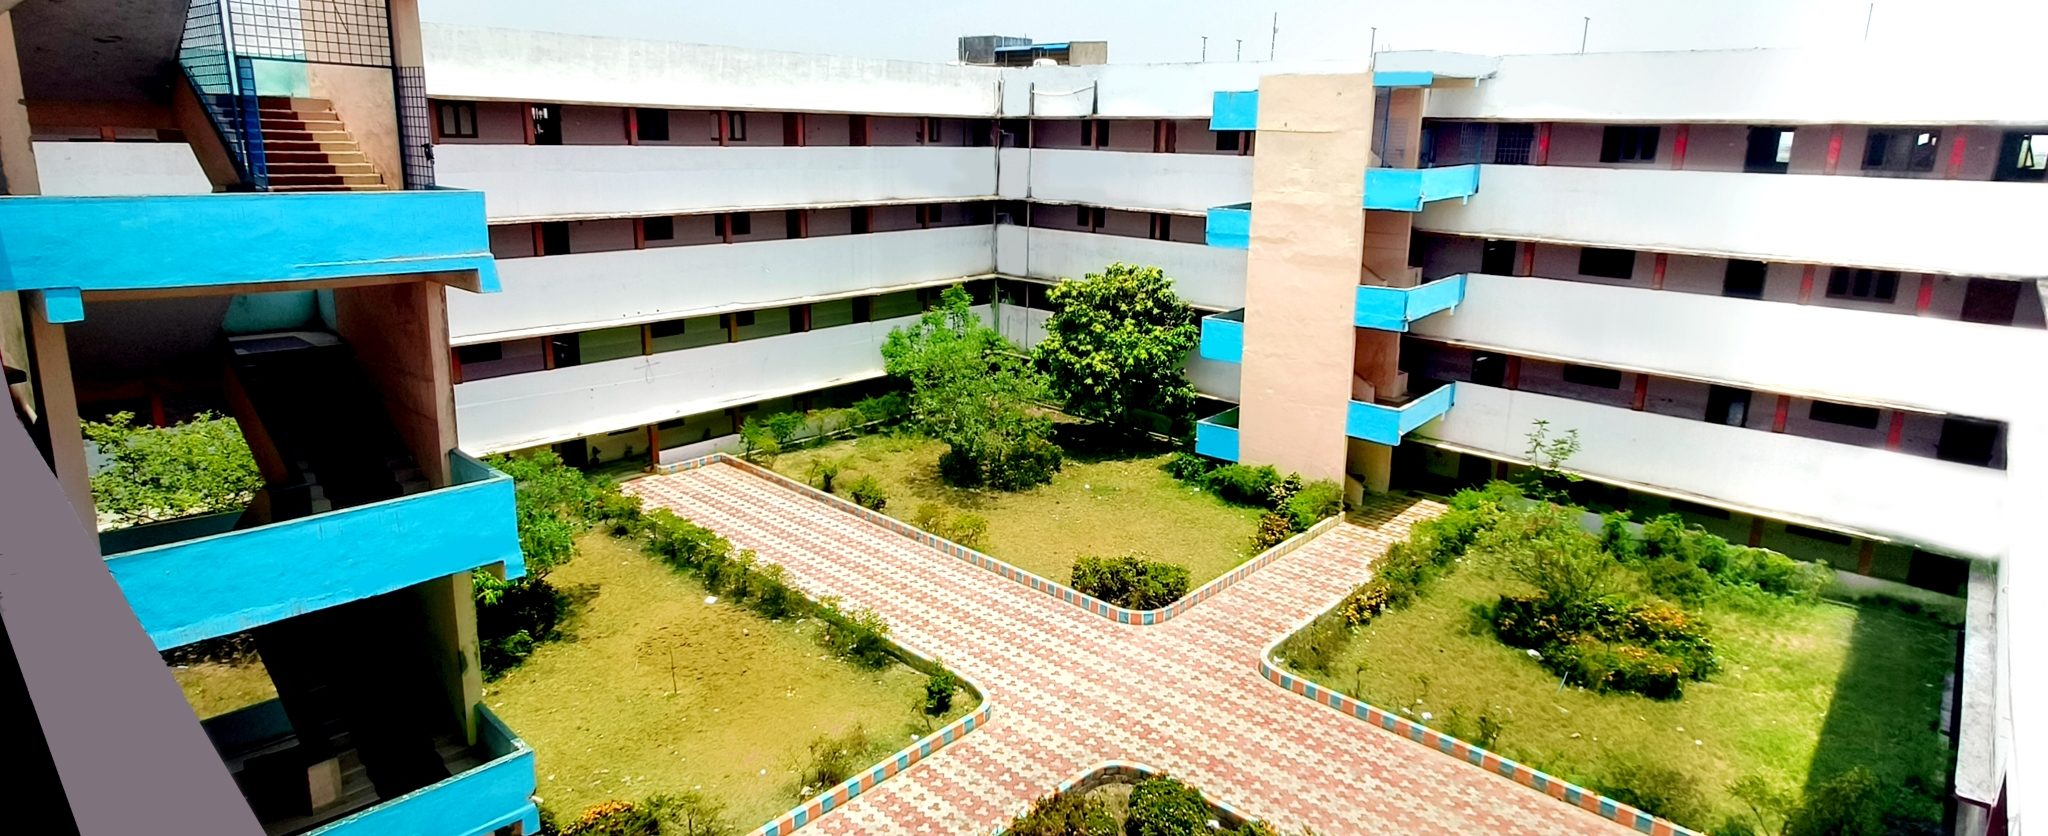 Priyadarshini Institute of Technology and Management